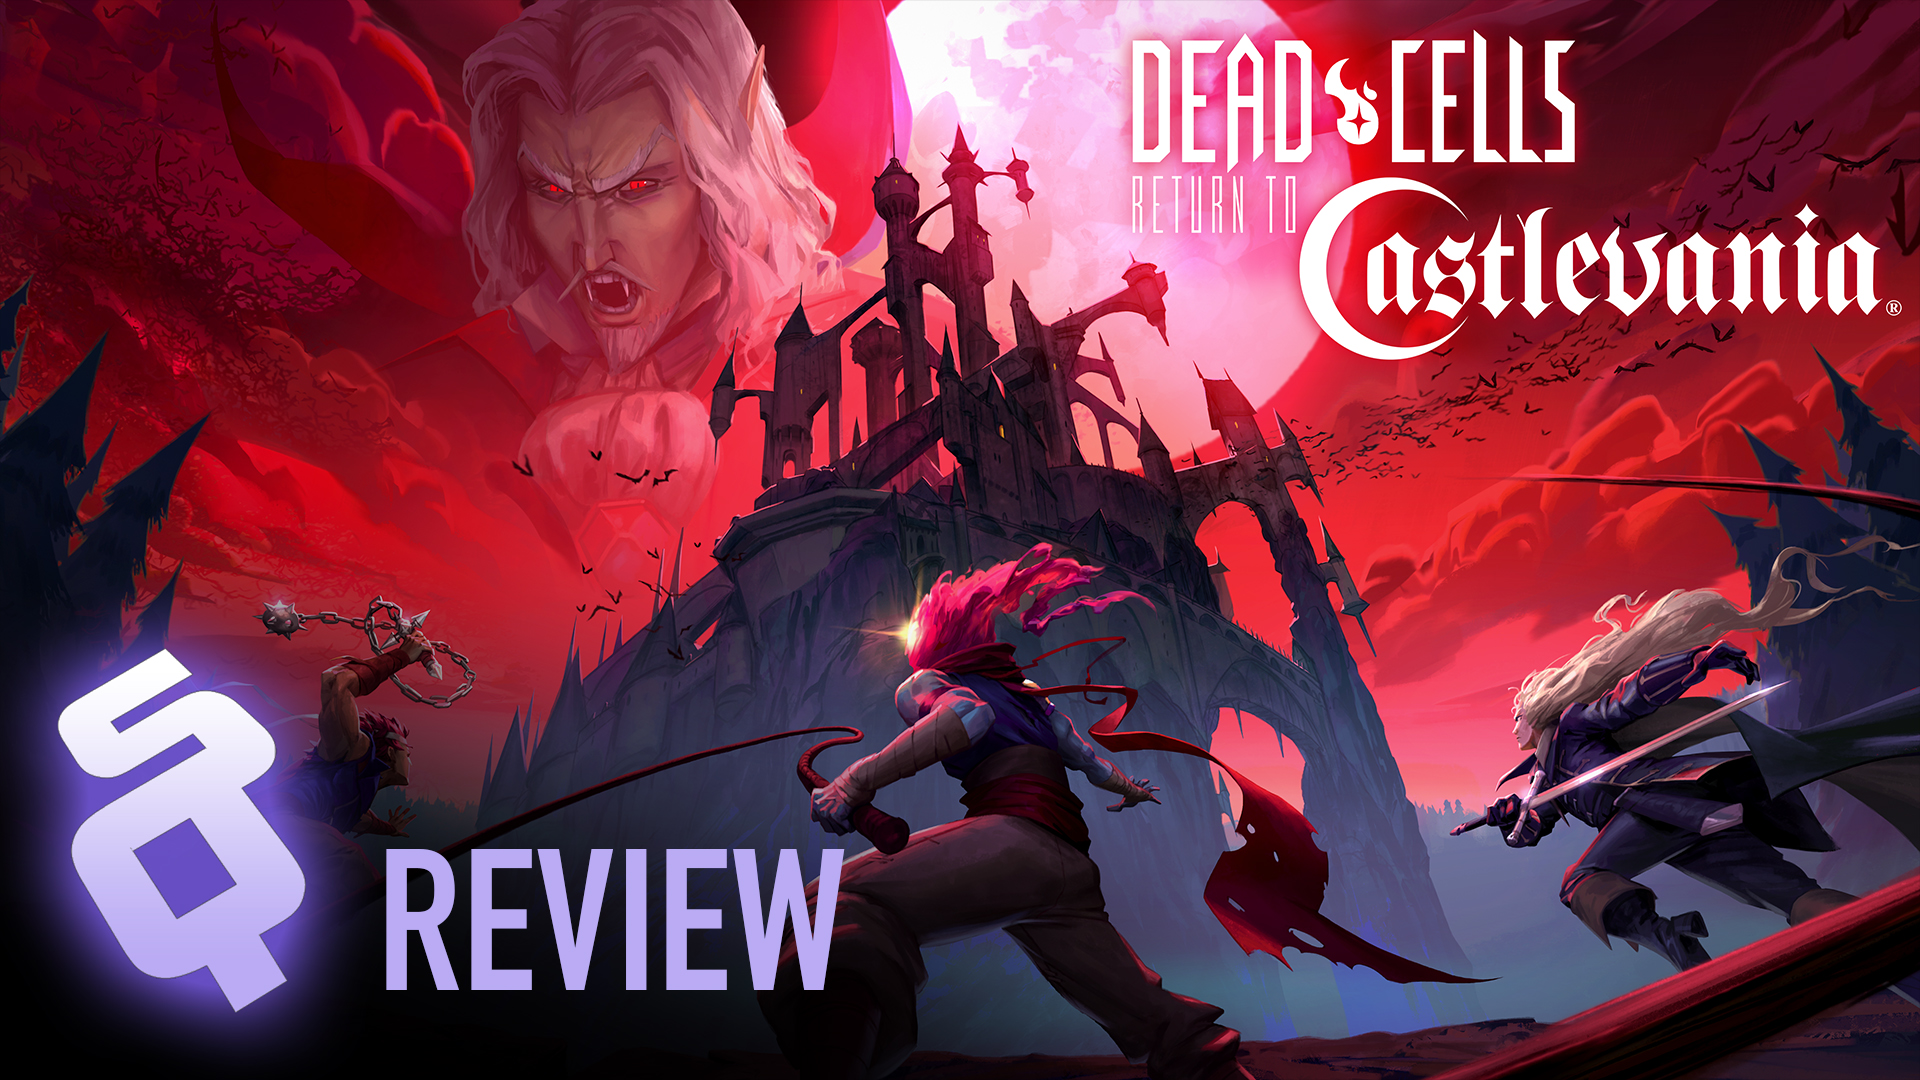 Dead Cells: Return to Castlevania review